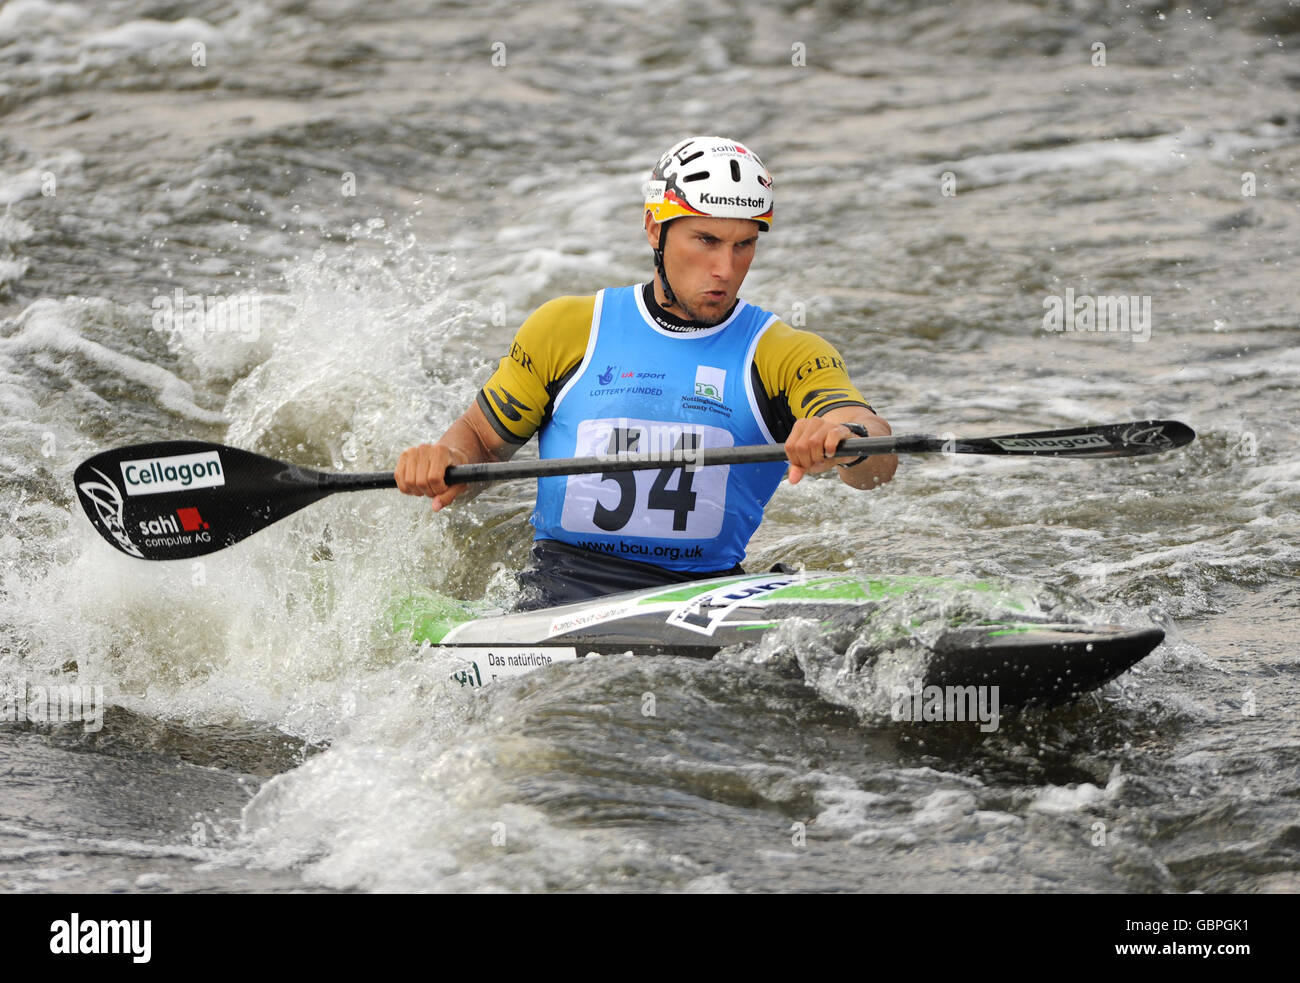 Germany's Alexander Grimm in action during the Men's K1 Qualifications during the European Slalom Championships at Holme Pierrepont, Nottingham. Stock Photo